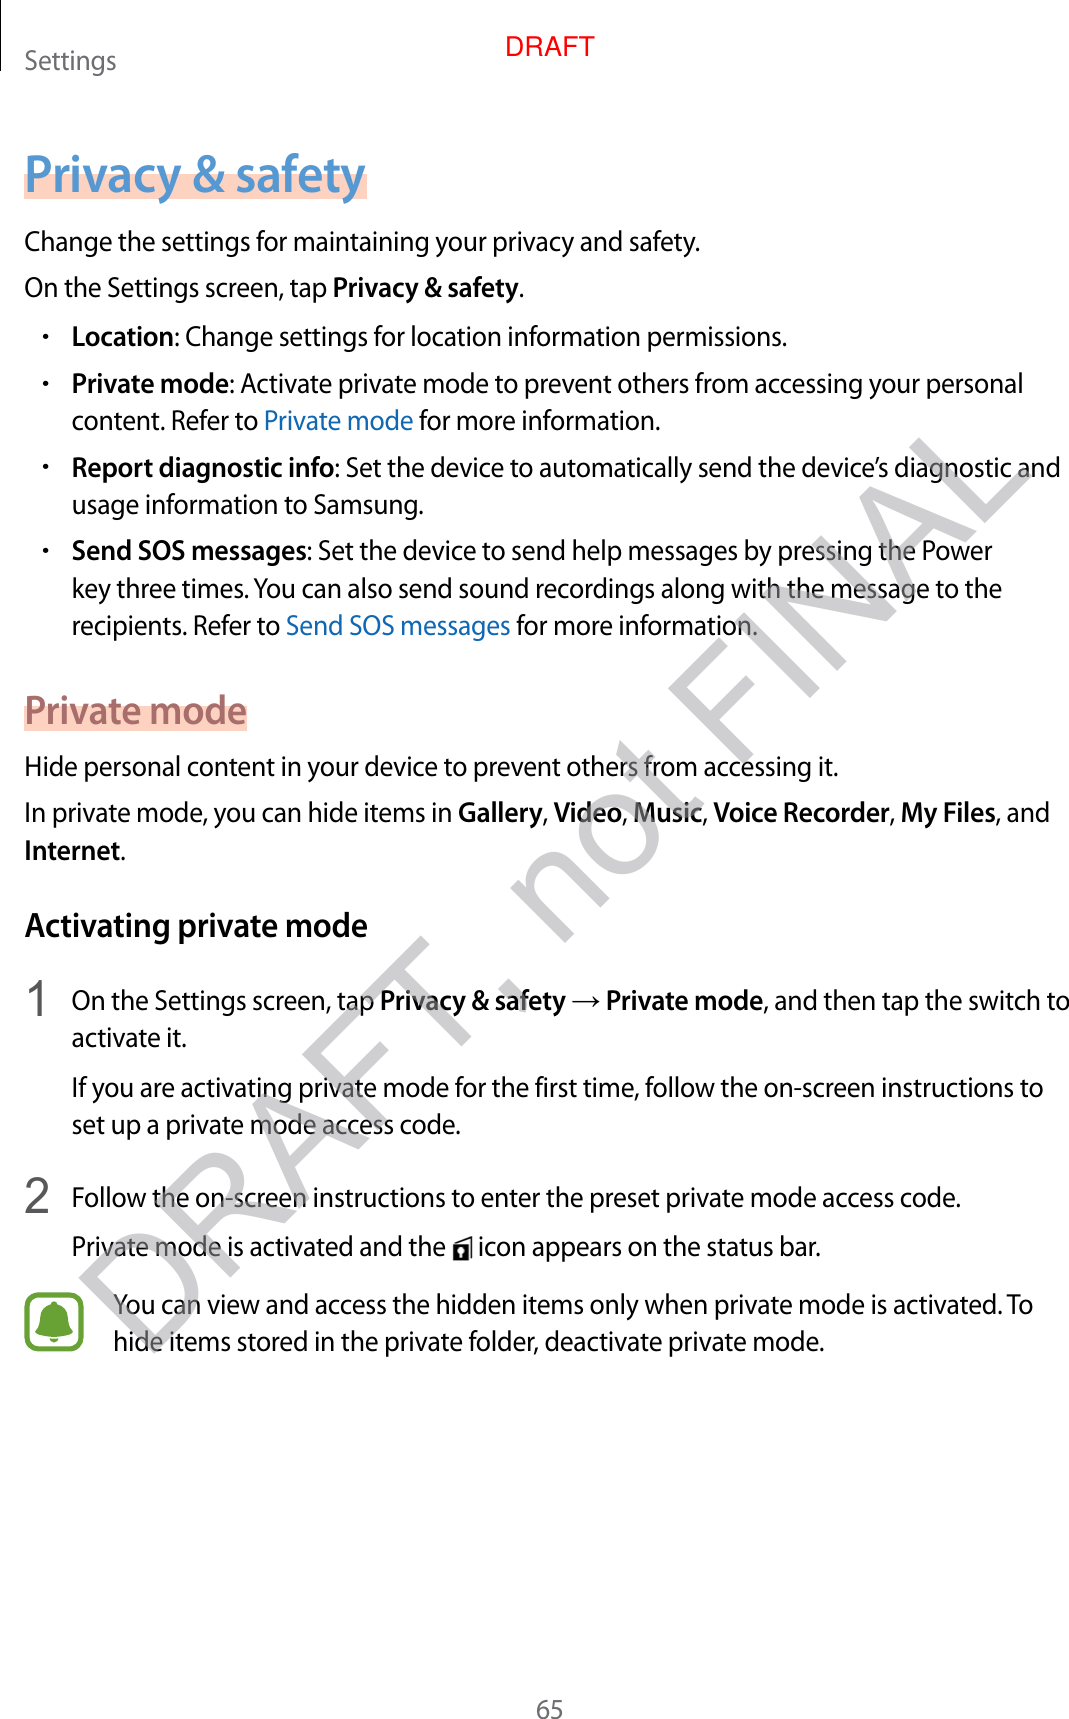 Settings65Privacy &amp; safetyChange the settings for maintaining your privacy and safety.On the Settings screen, tap Privacy &amp; safety.•Location: Change settings for location information permissions.•Private mode: Activate private mode to prevent others from accessing your personal content. Refer to Private mode for more information.•Report diagnostic info: Set the device to automatically send the device’s diagnostic and usage information to Samsung.•Send SOS messages: Set the device to send help messages by pressing the Power key three times. You can also send sound recordings along with the message to the recipients. Refer to Send SOS messages for more information.Private modeHide personal content in your device to prevent others from accessing it.In private mode, you can hide items in Gallery, Video, Music, Voice Recorder, My Files, and Internet.Activating private mode1  On the Settings screen, tap Privacy &amp; safety → Private mode, and then tap the switch to activate it.If you are activating private mode for the first time, follow the on-screen instructions to set up a private mode access code.2  Follow the on-screen instructions to enter the preset private mode access code.Private mode is activated and the   icon appears on the status bar.You can view and access the hidden items only when private mode is activated. To hide items stored in the private folder, deactivate private mode.DRAFT, not FINALDRAFT